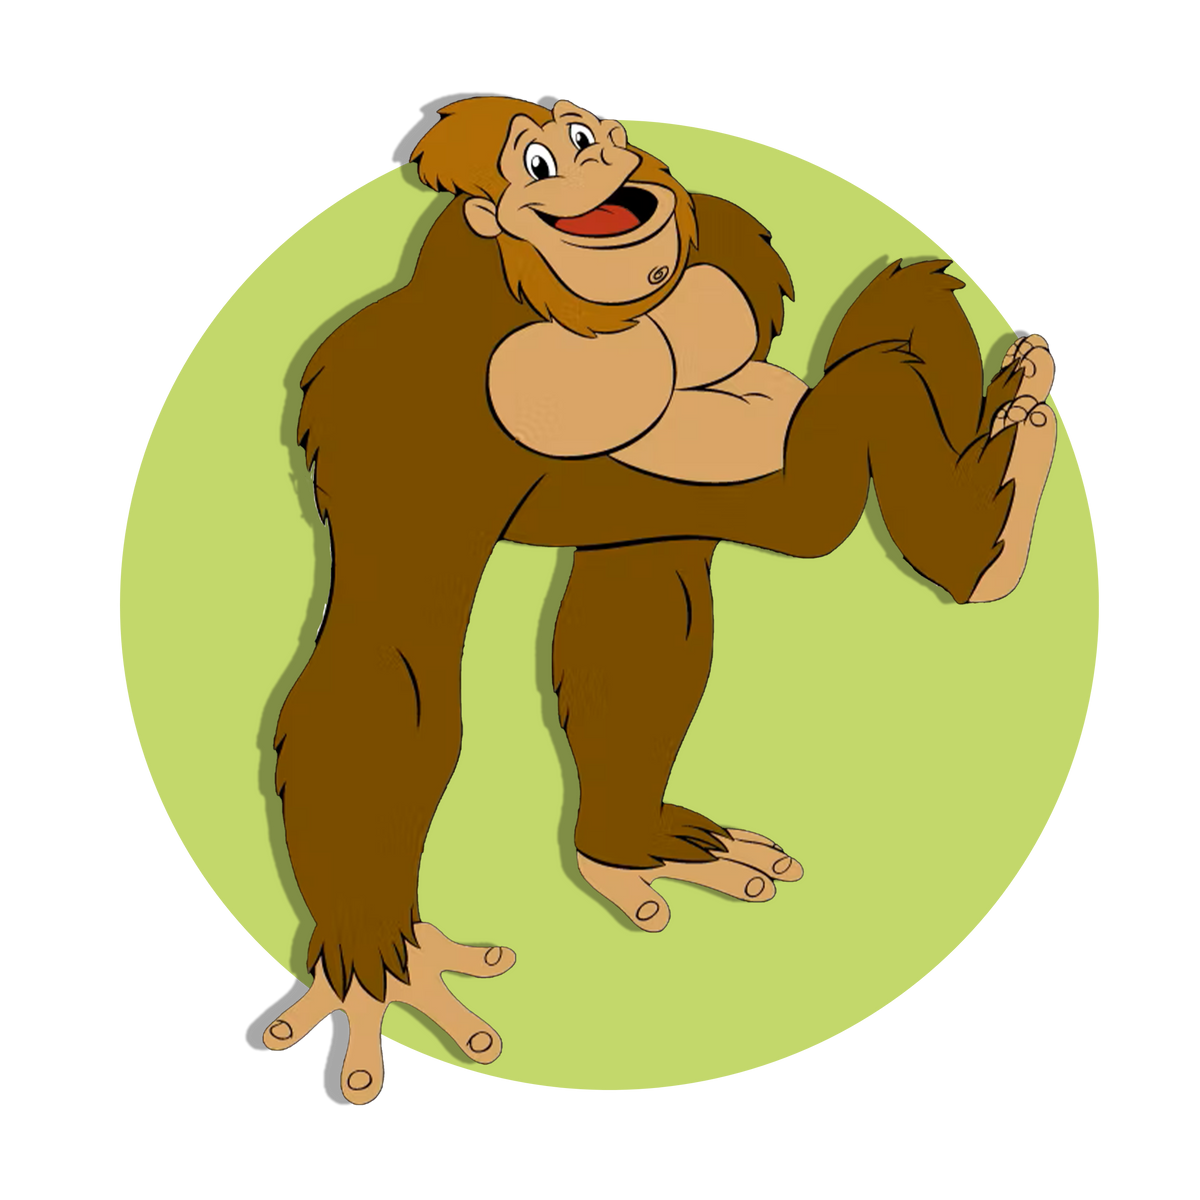  a cartoon character that resembles an ape with brown hair and a big smile. The character is sitting and has a large belly and long arms, giving it a friendly and approachable look. It’s set against a light green circular background that highlights the character